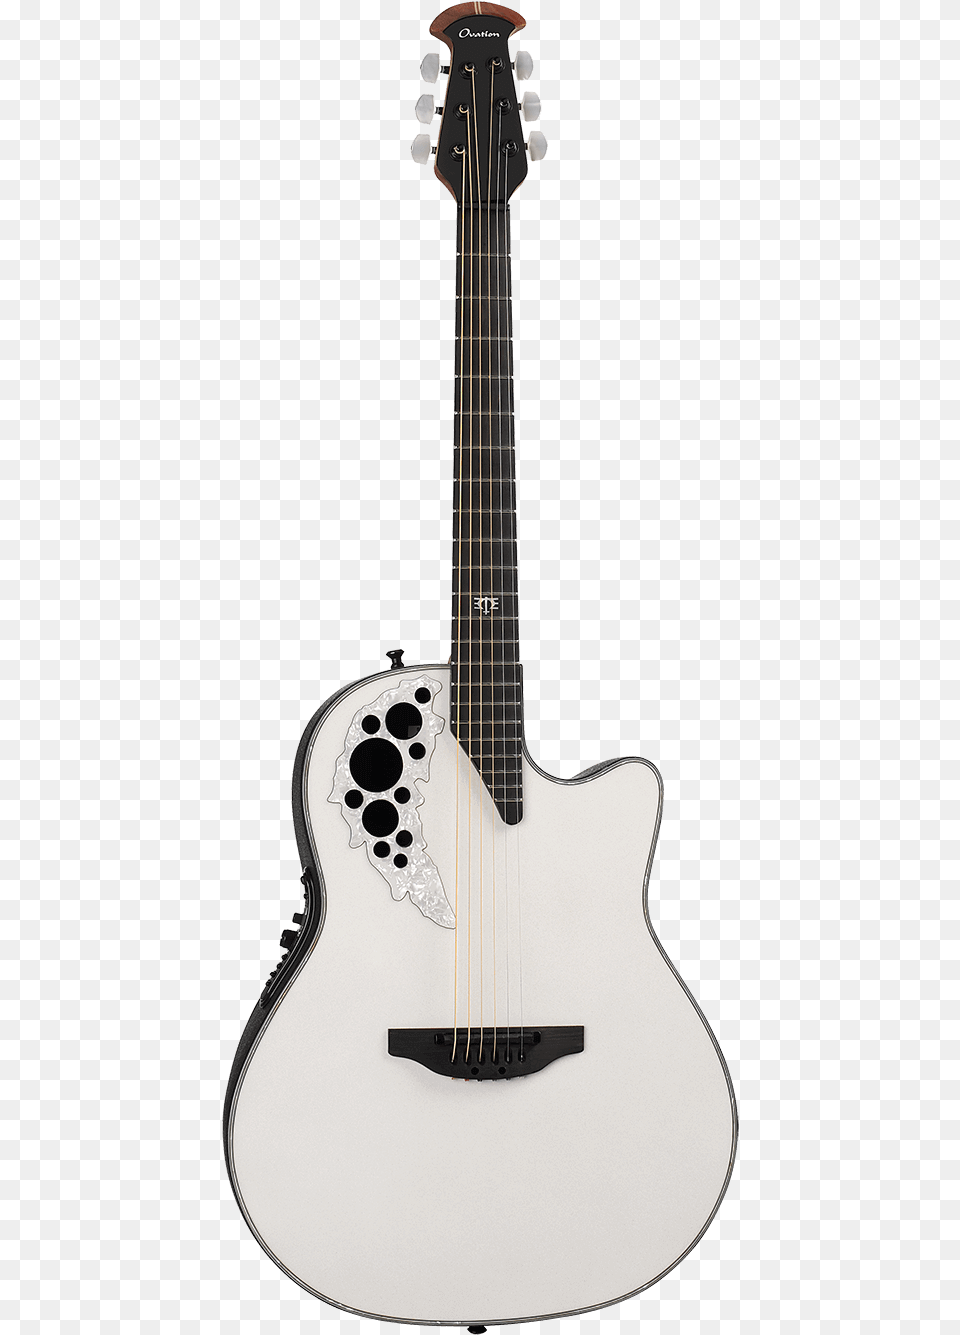 6p Melissa Etheridge Pearlescent White Guitar, Musical Instrument, Bass Guitar Png Image